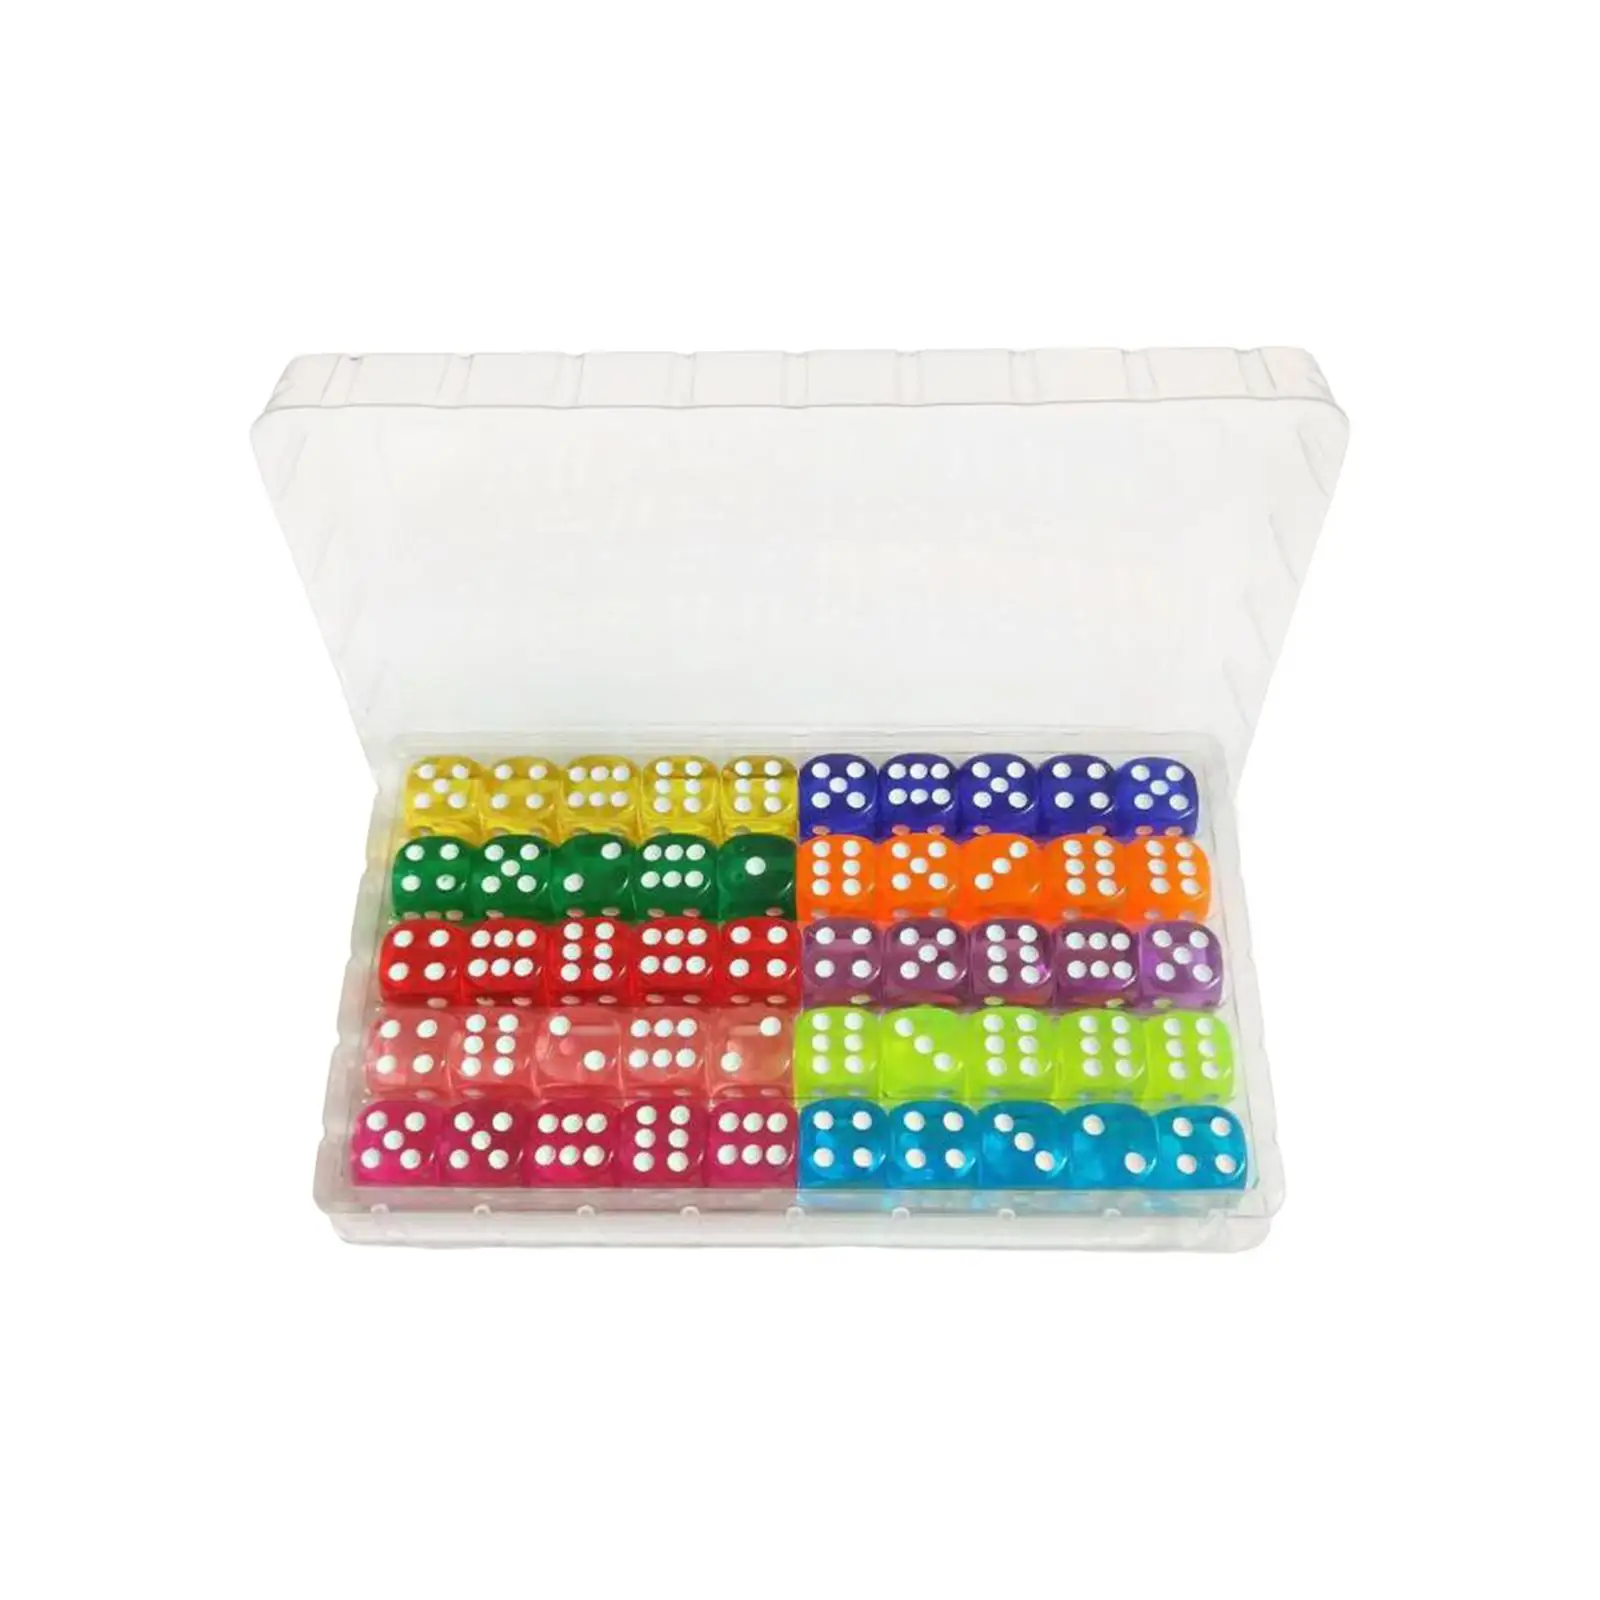 50 Pieces 6 Sided Dices Party Favors Game Dices Entertainment Toys for Board Game Translucent Colors Dices